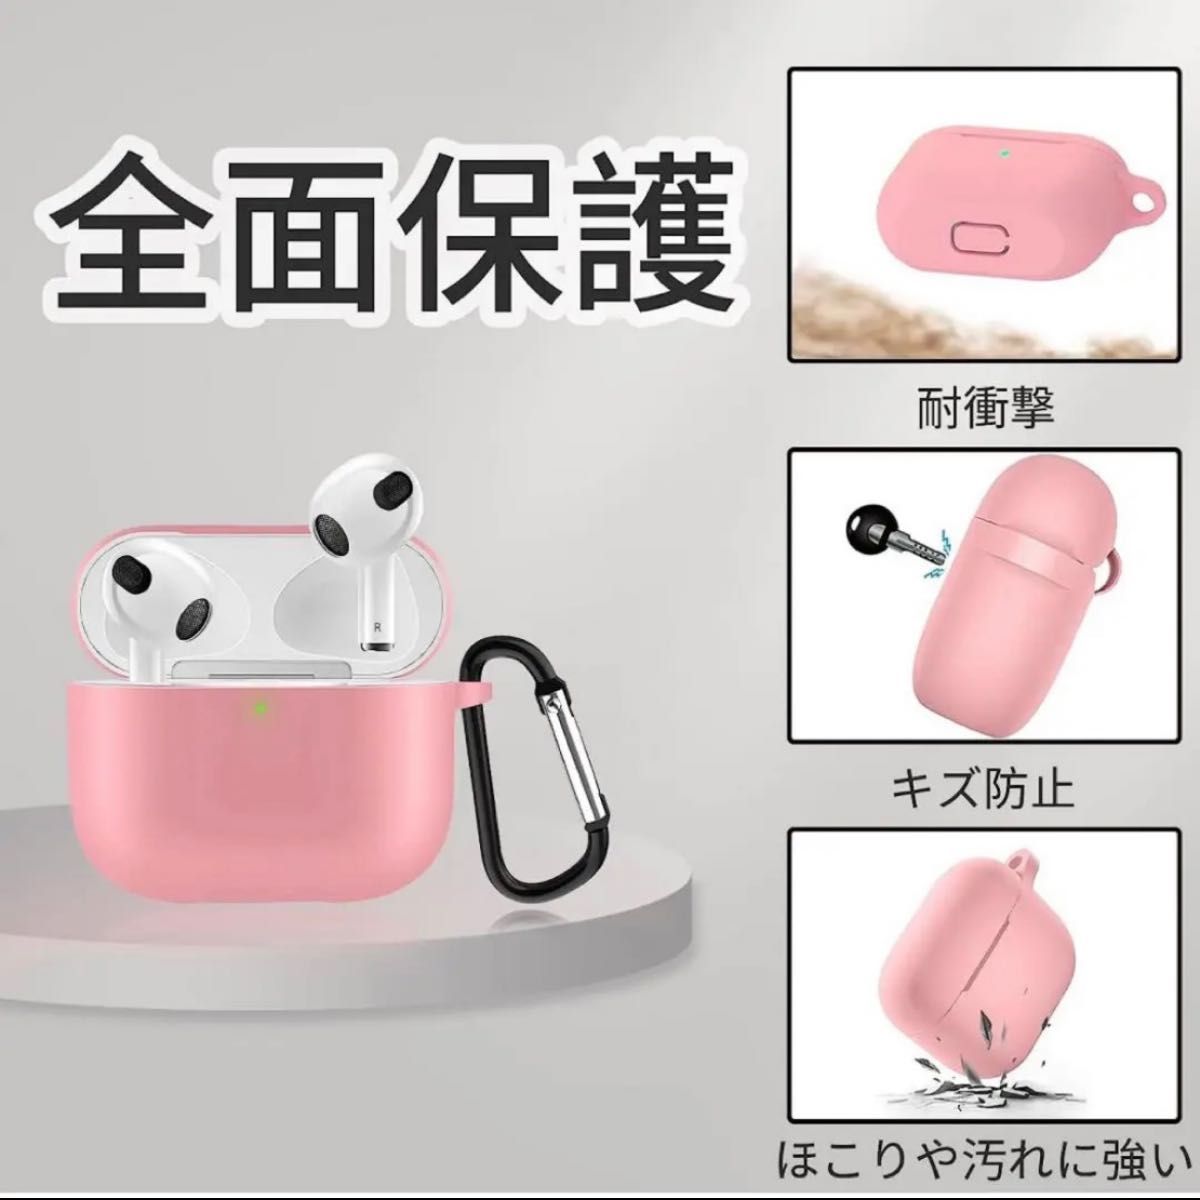 ☆30%off価格☆箱付き・未使用品☆ ピンク AirPods 第三世代 ケース 2021年発売